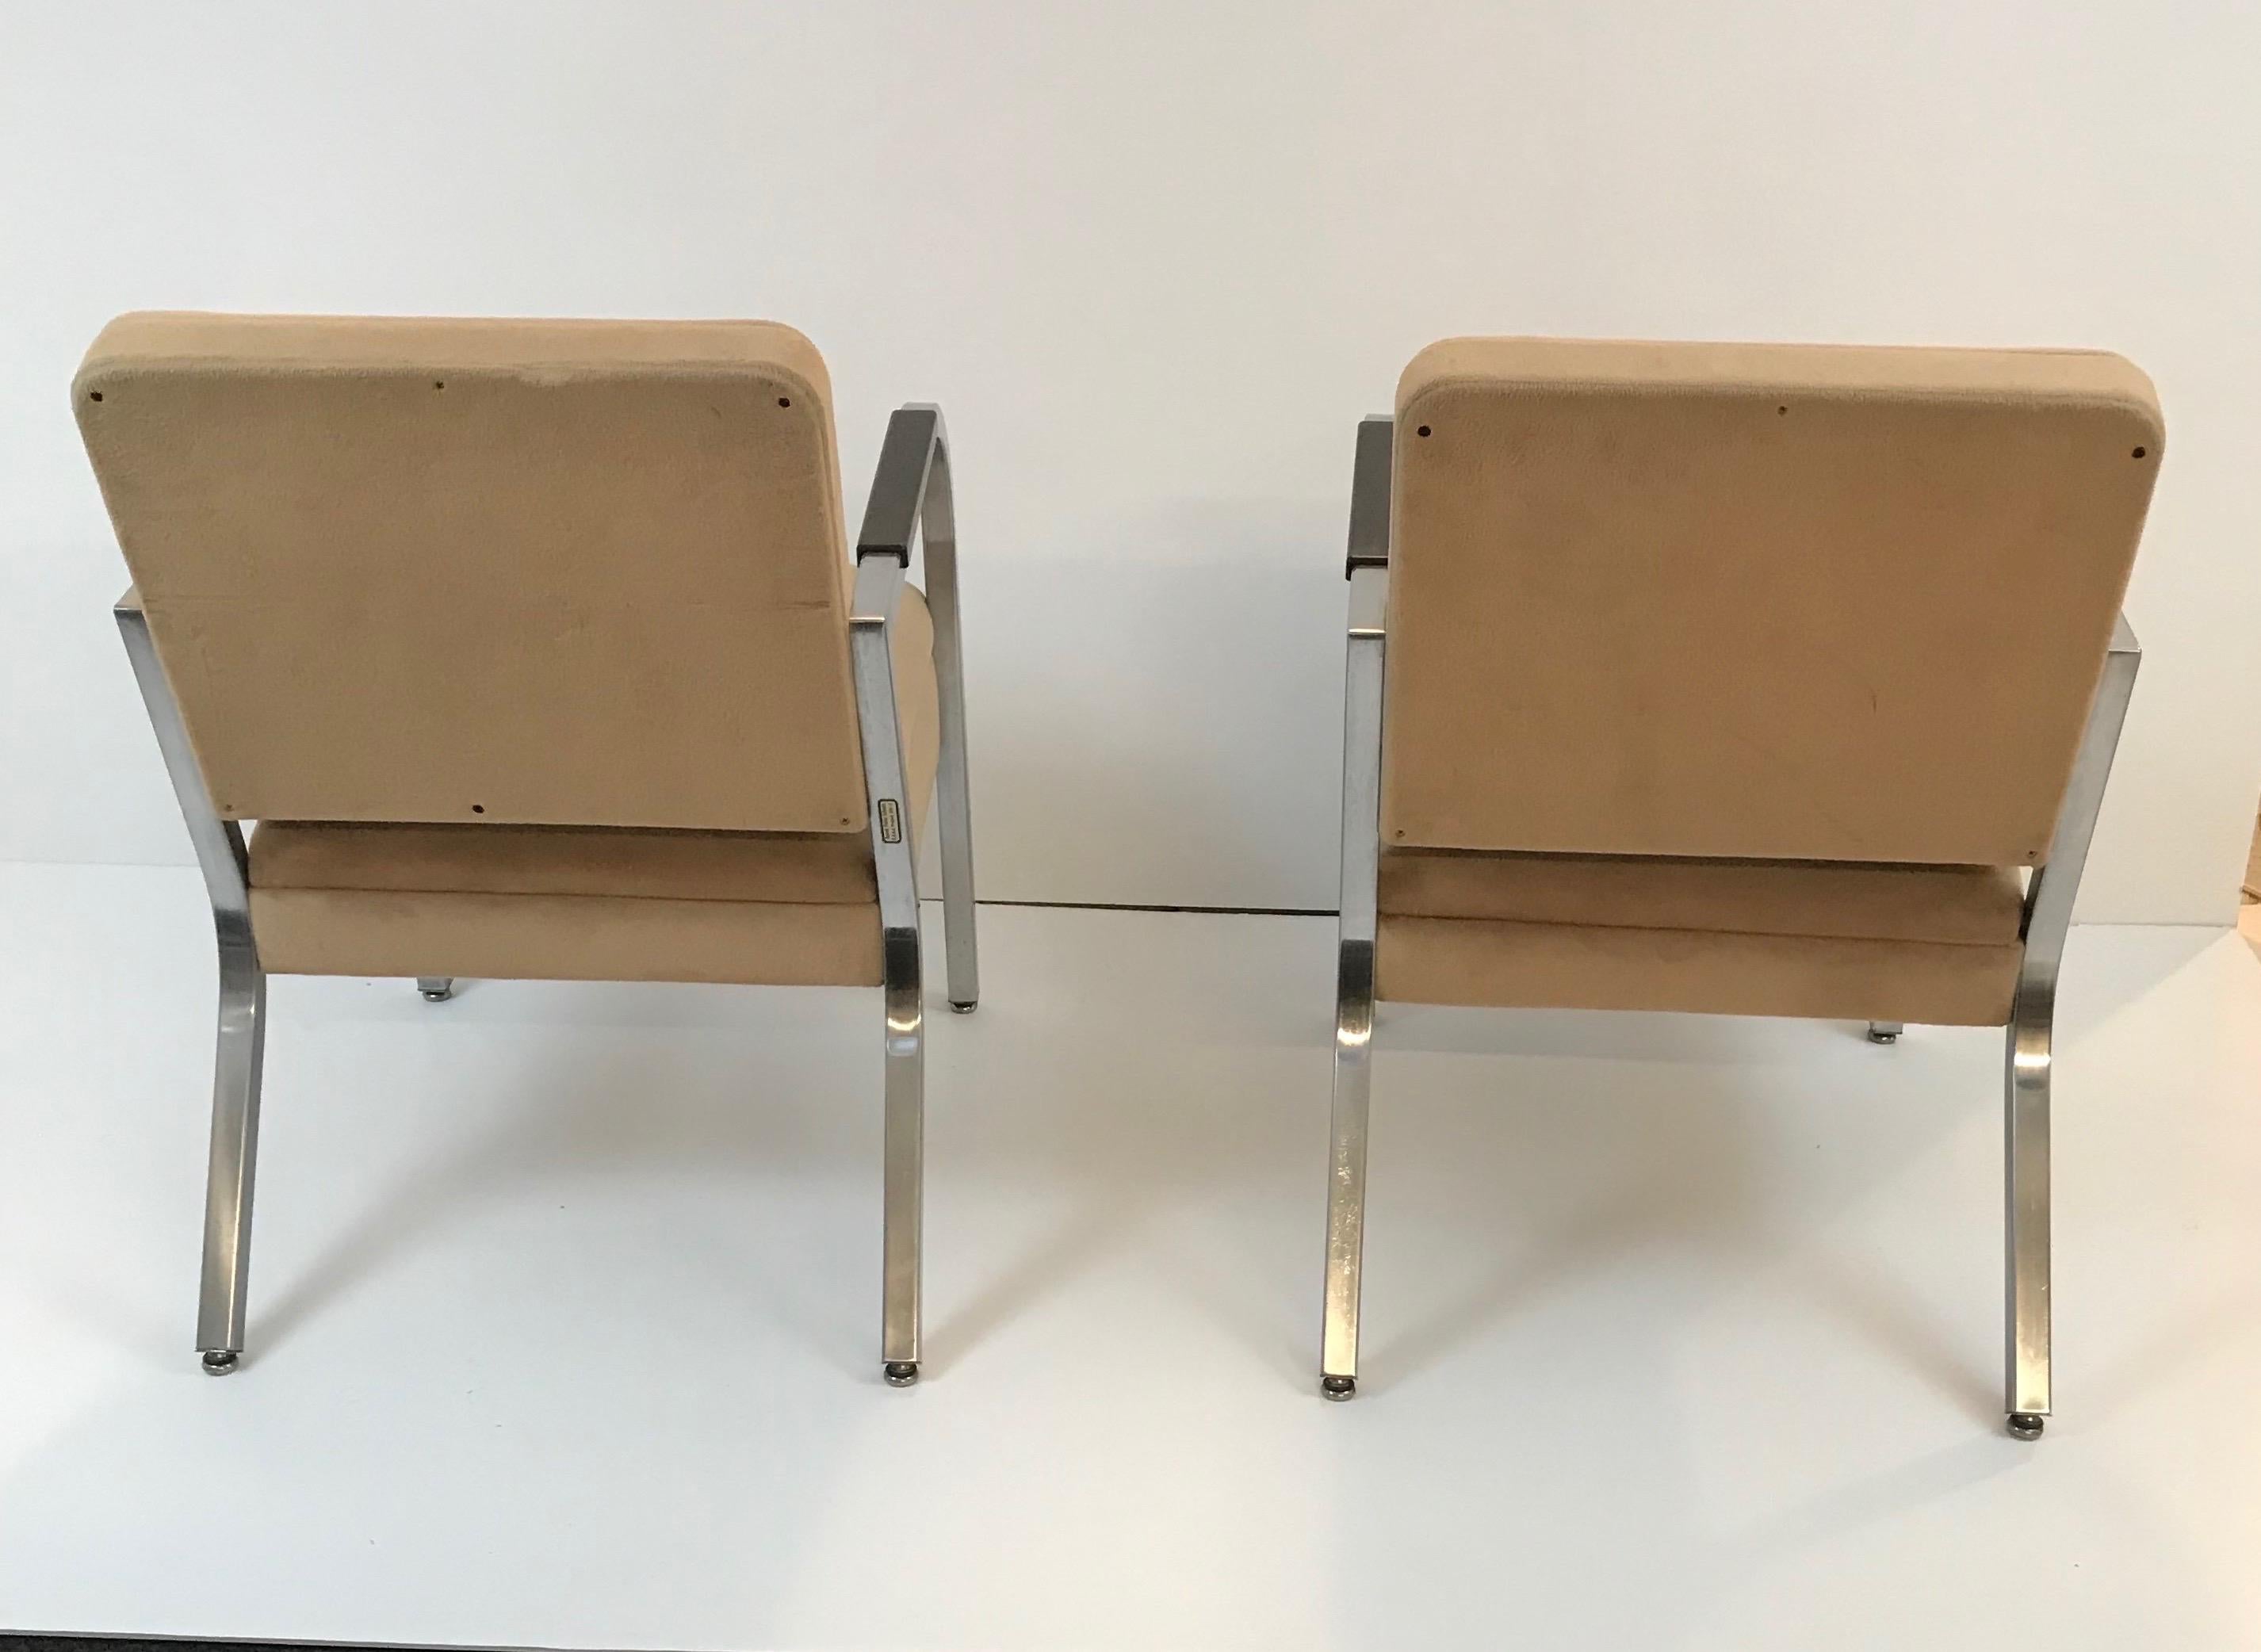 Machine-Made A Pair of Petite Square Tubing 1960's Club Chairs IMO Shaw Walker or Goodform,  